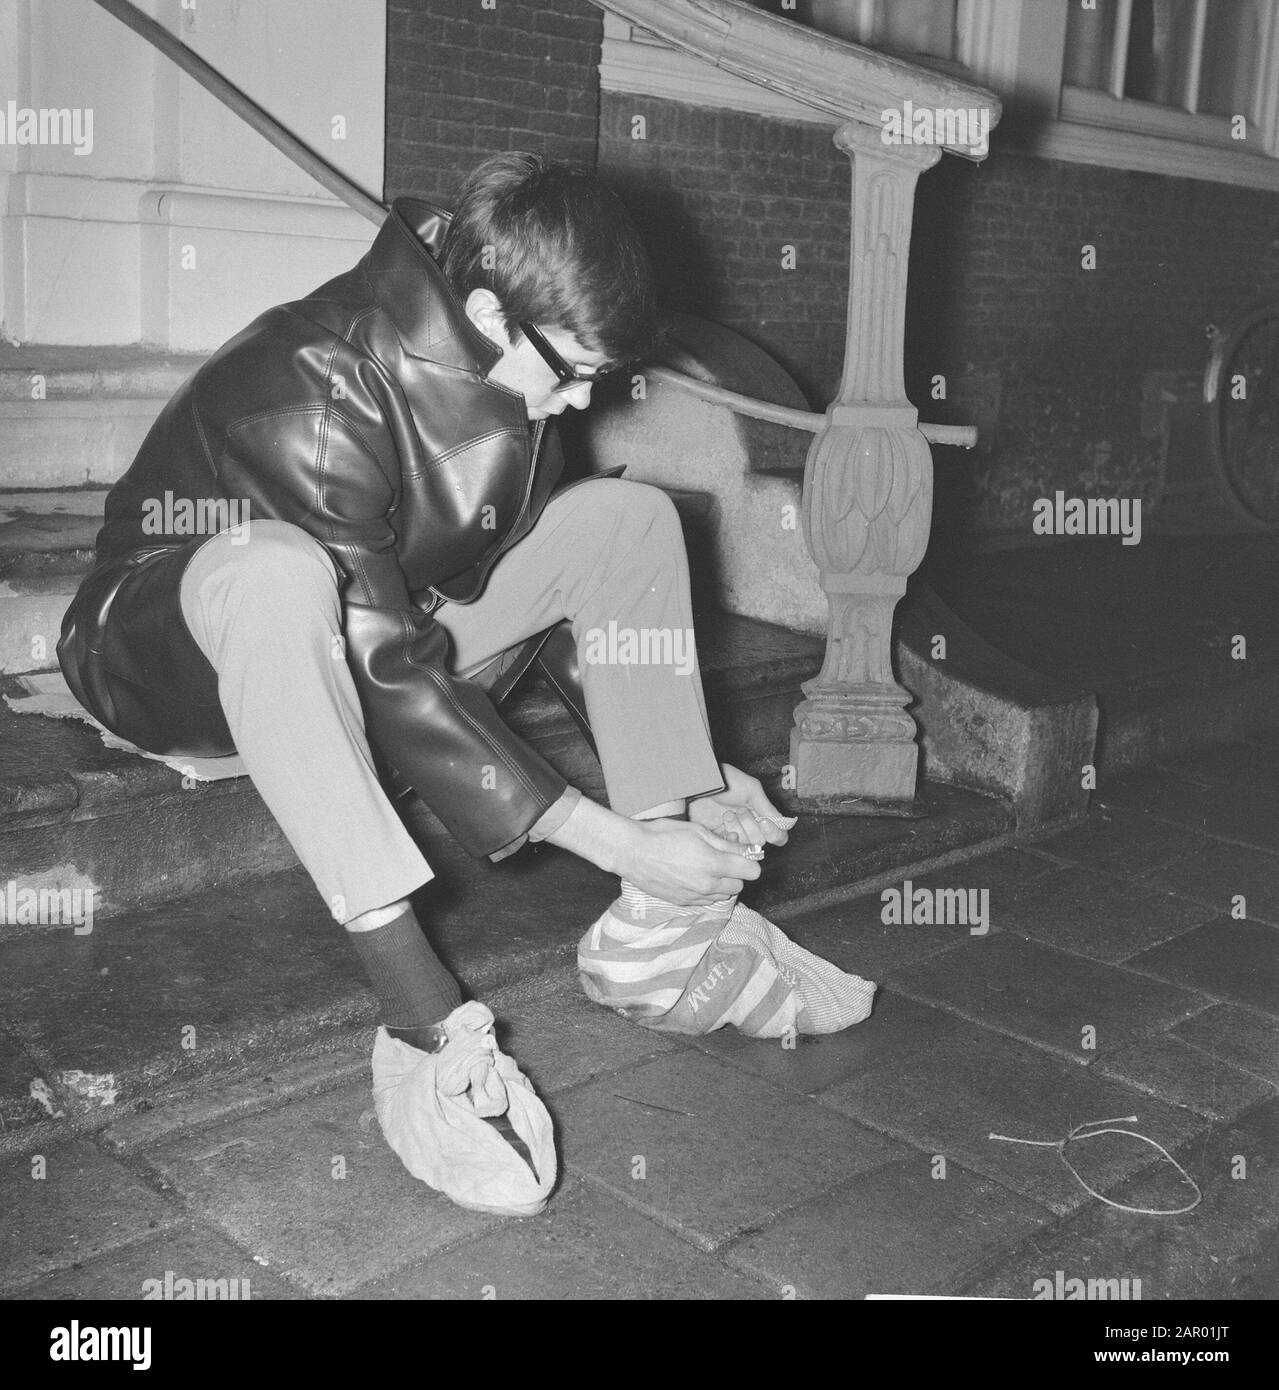 Boy does cloths around his shoes in the sleeveless Date: 18 December 1961 Keywords: IJZEL, BOY, SHOES Stock Photo